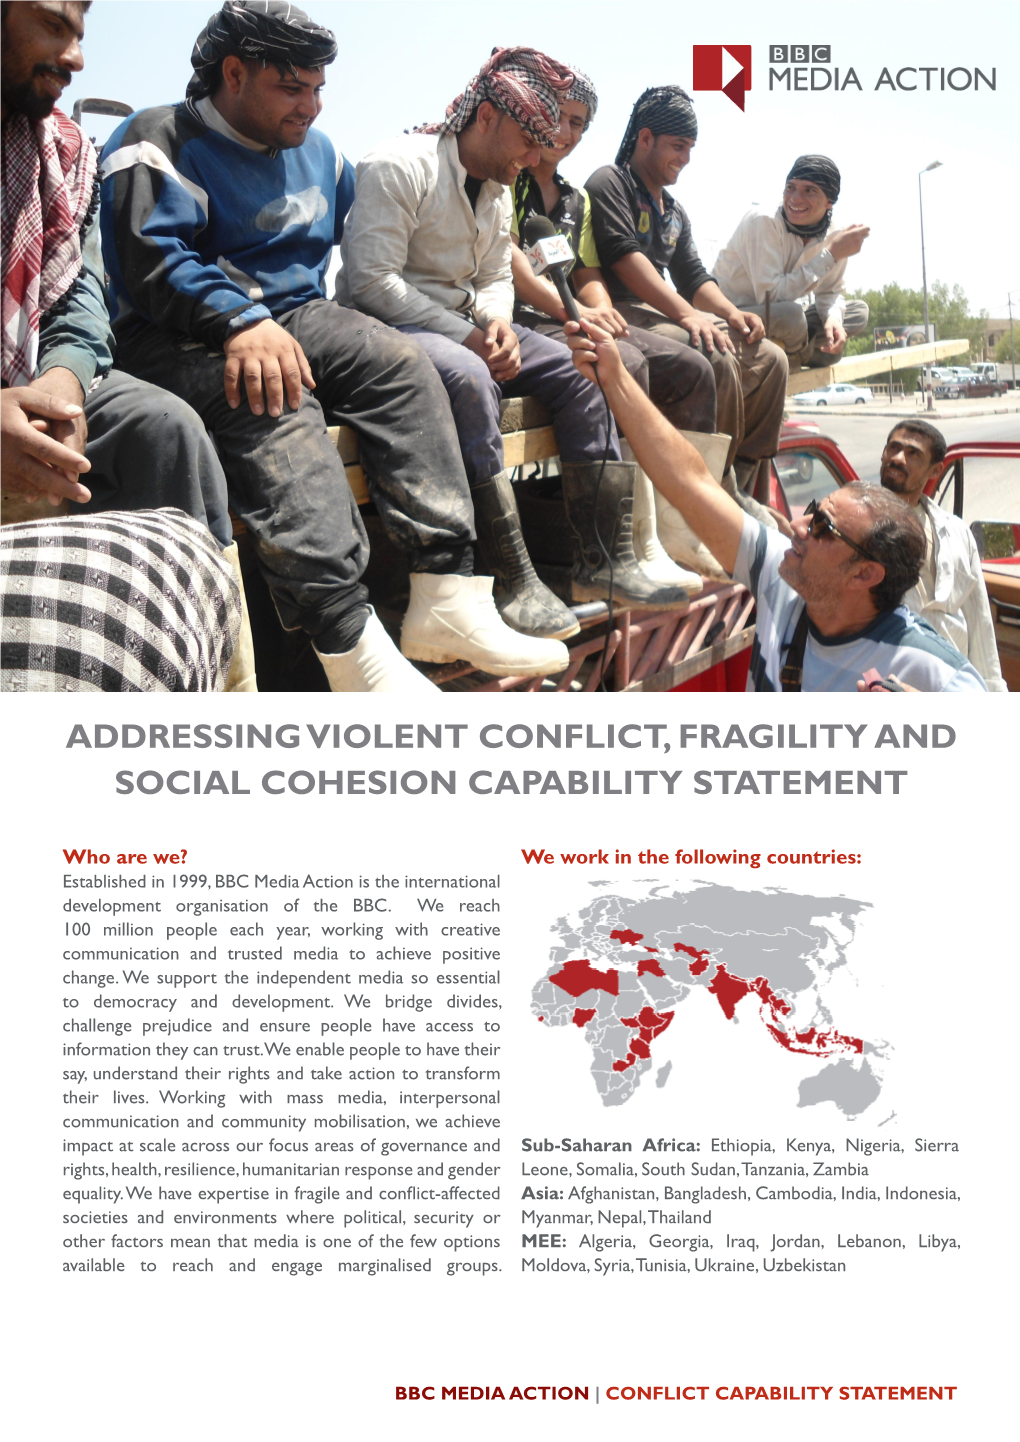 Addressing Violent Conflict, Fragility and Social Cohesion Capability Statement